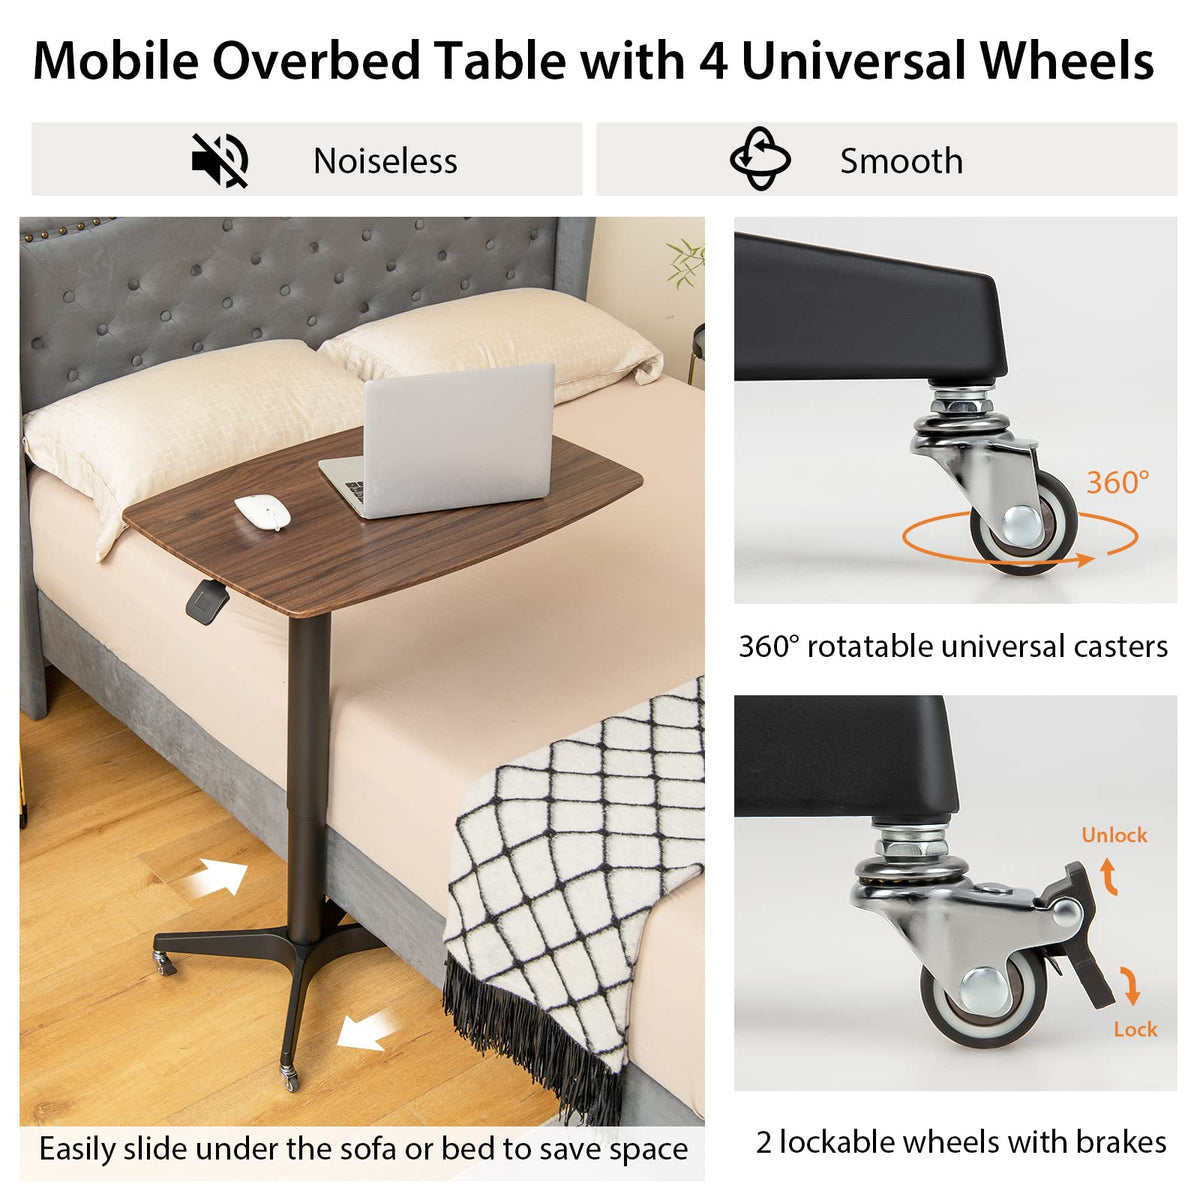 Giantex Adjustable Overbed Table, Pneumatic Medical Bedside Table